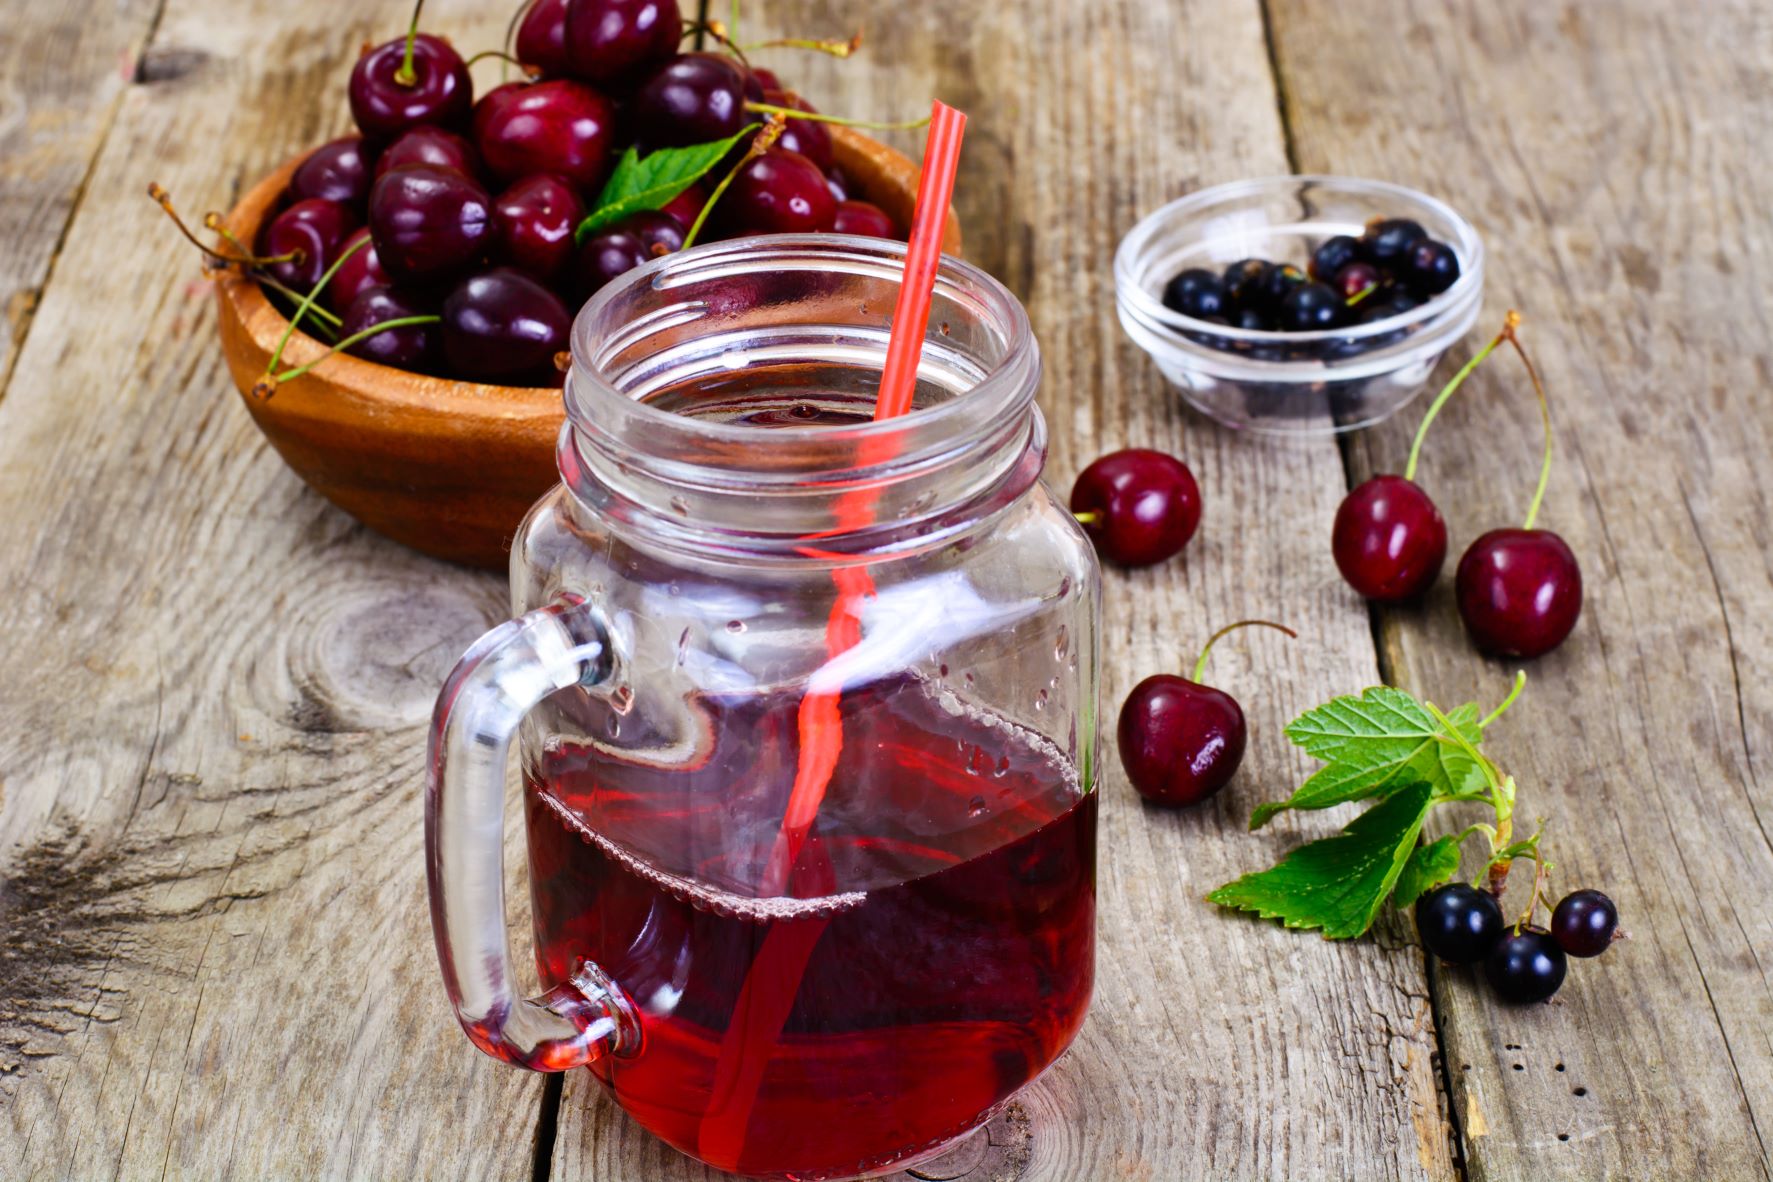 What Medications Does Tart Cherry Juice Interact With?  